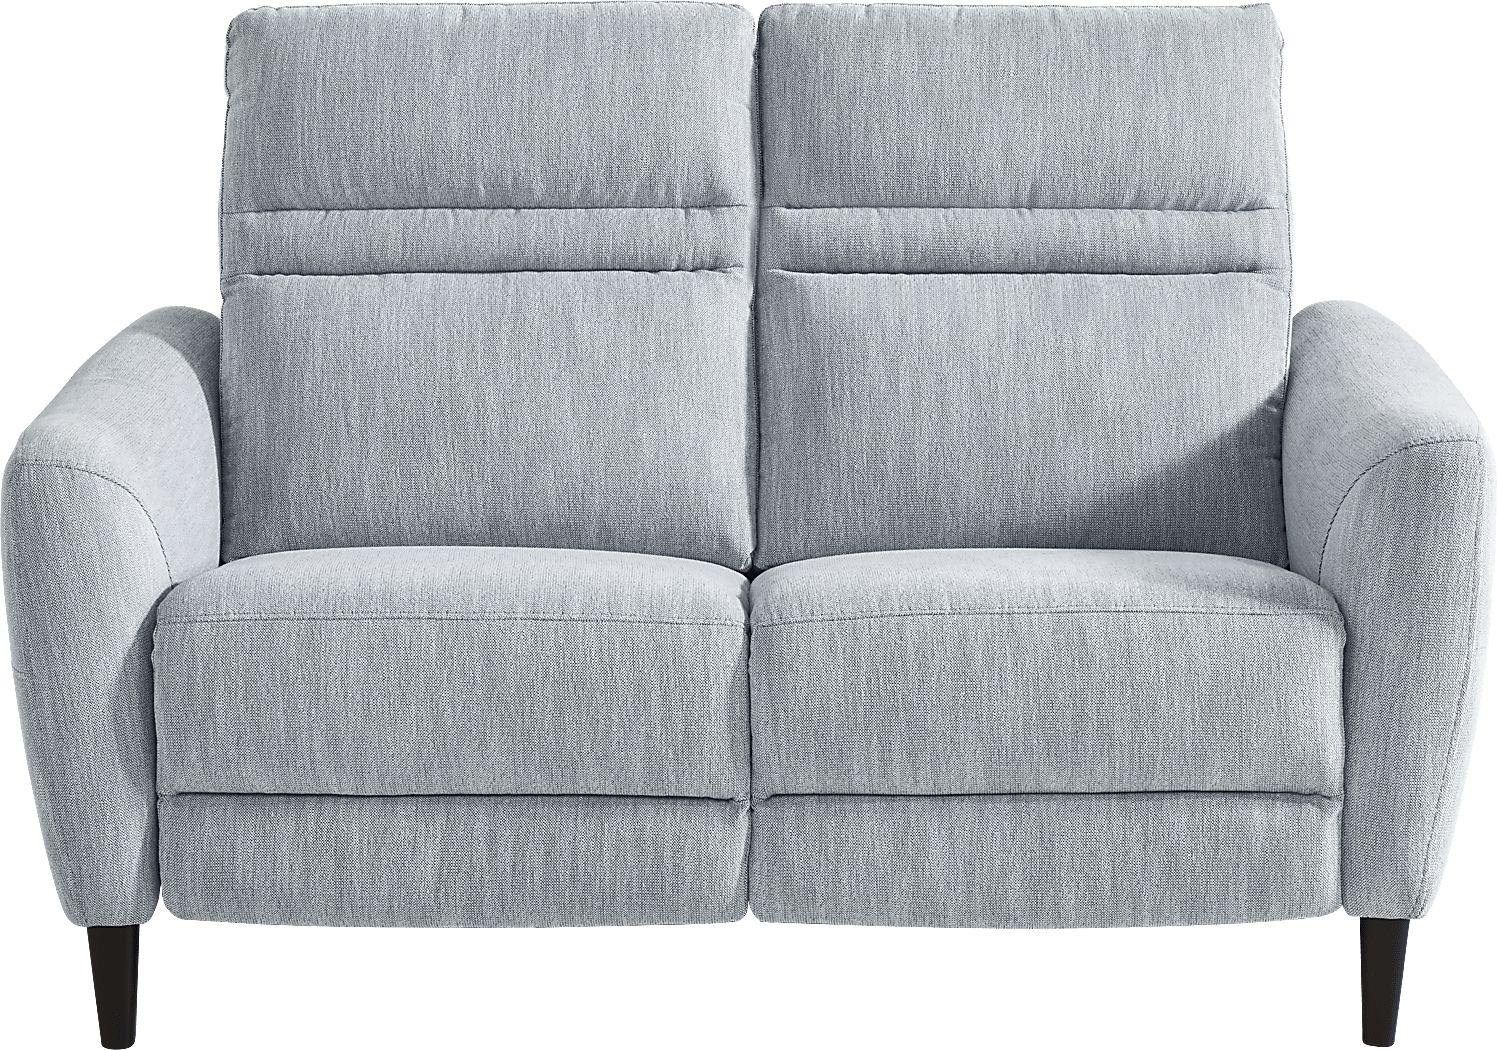 Corby Lane Ocean 6 Pc Living Room with Dual Power Reclining Sofa